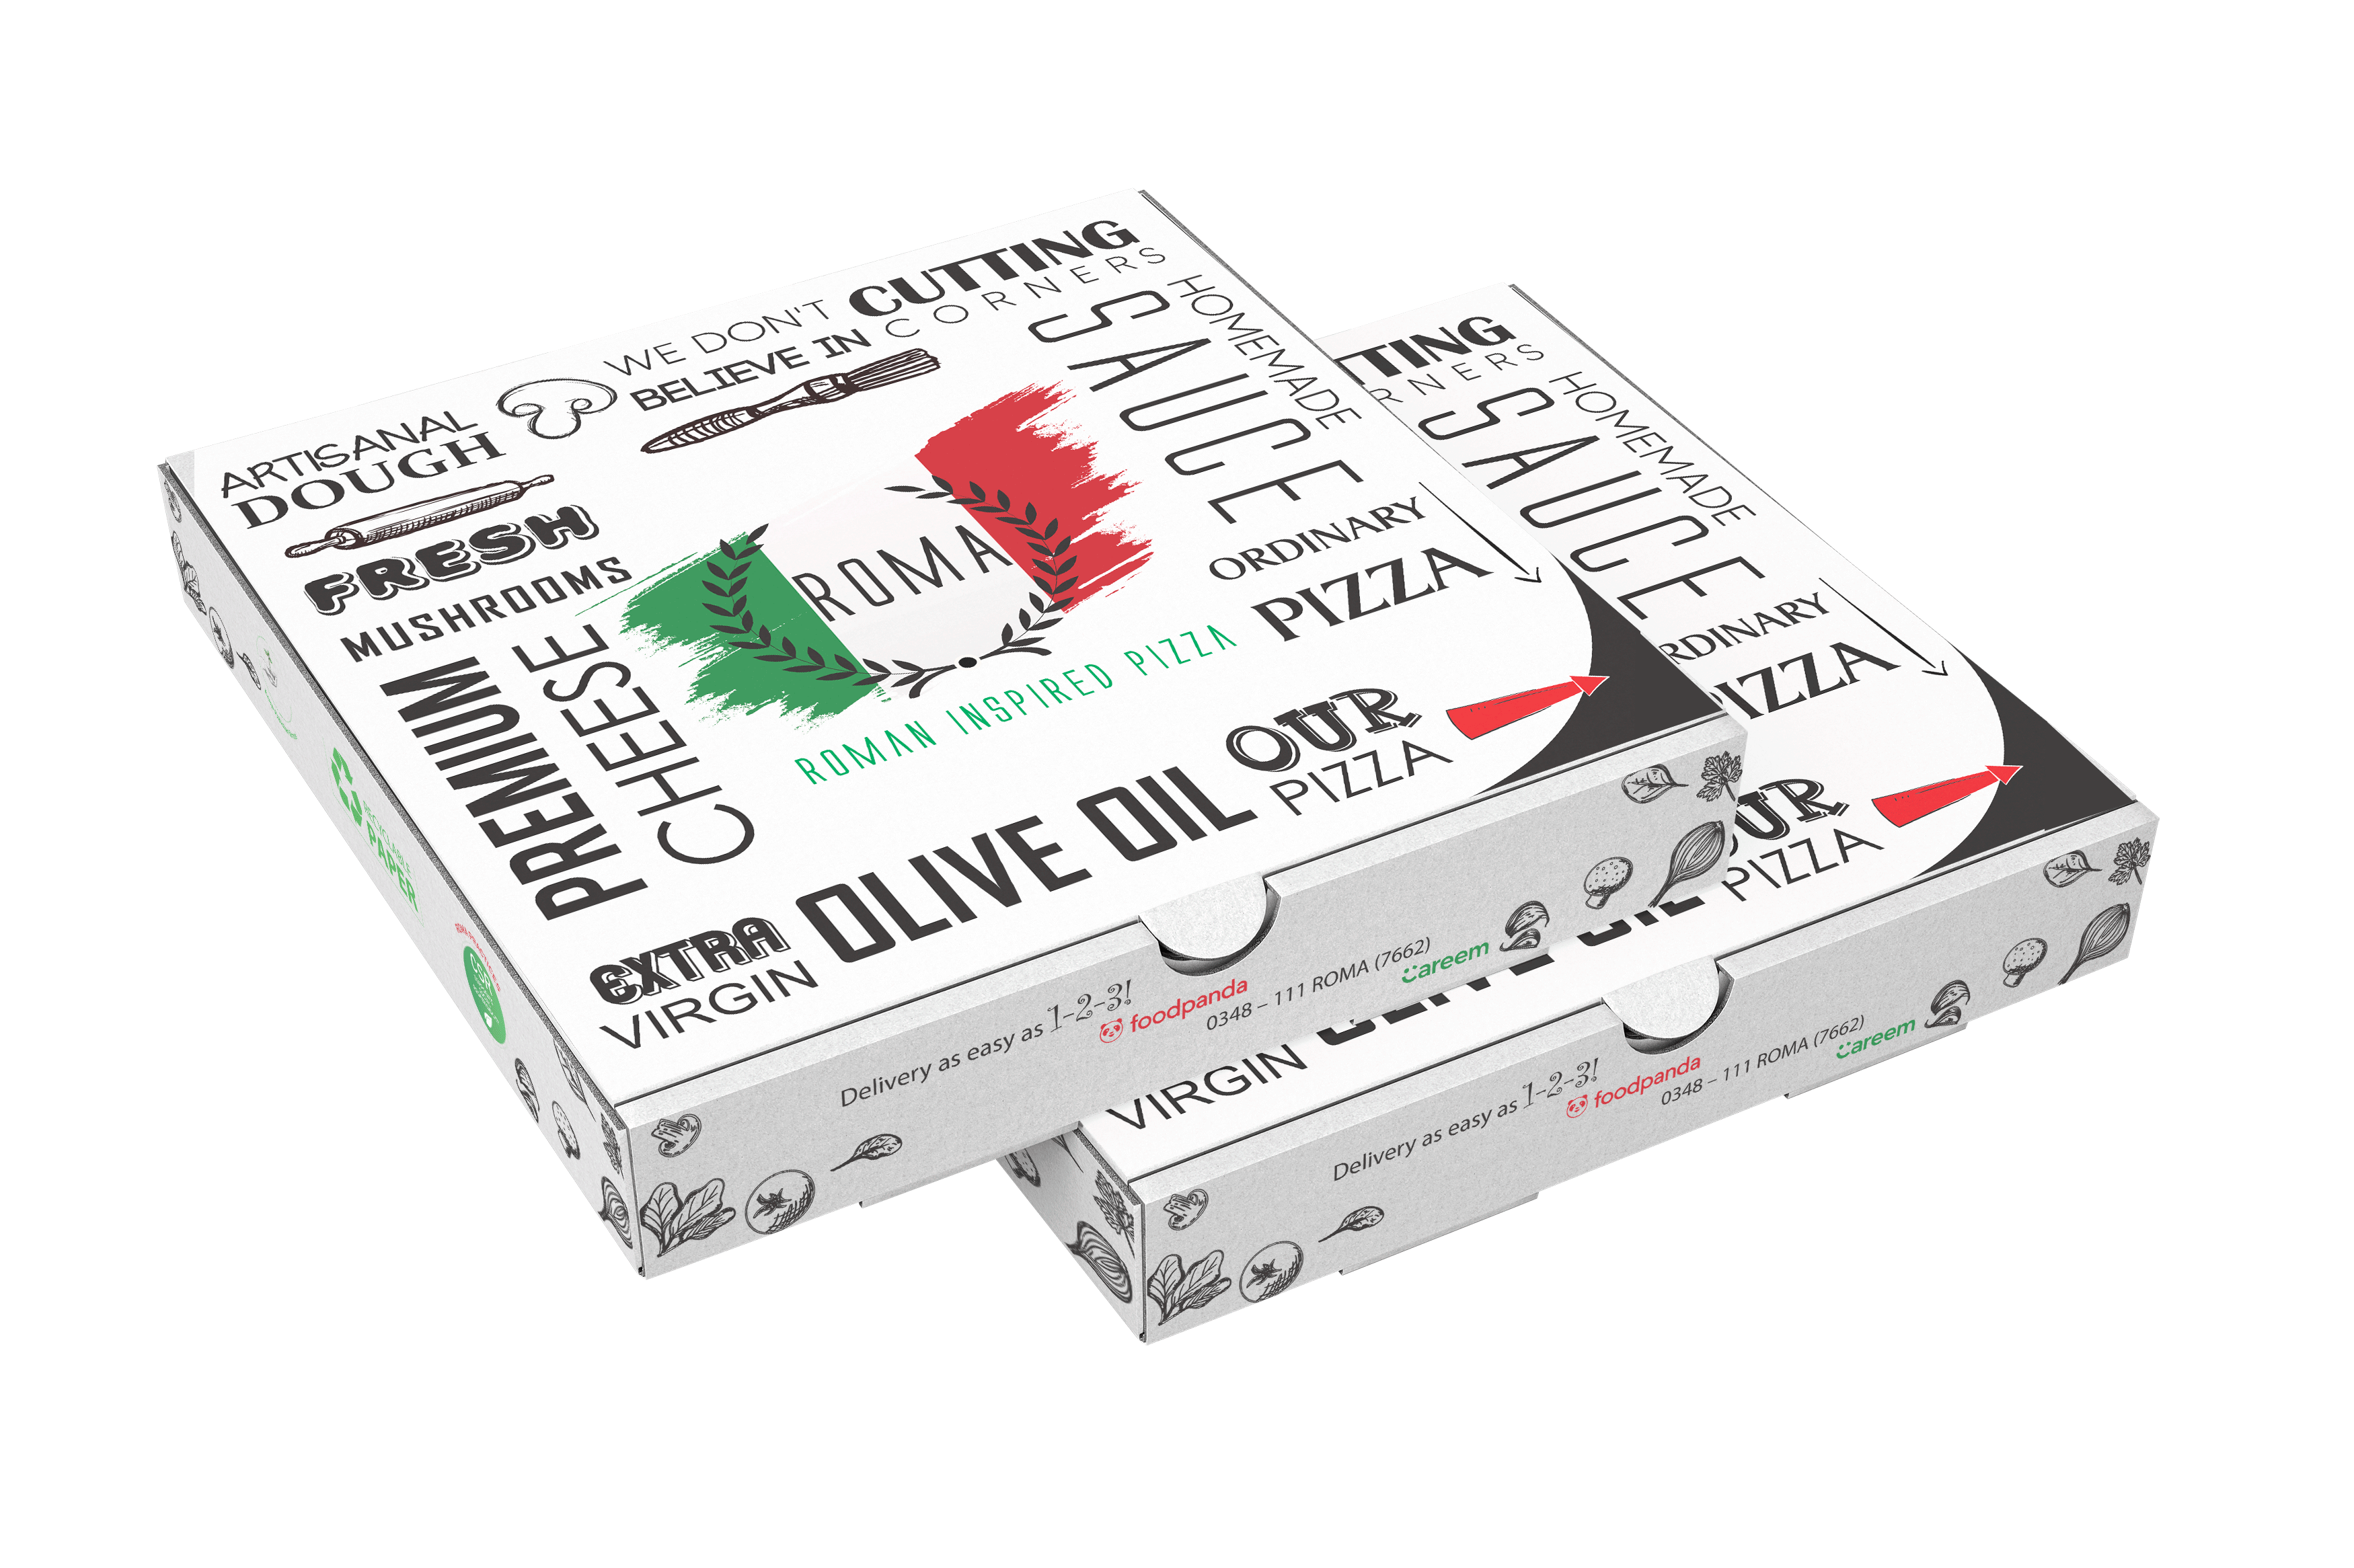 Roma Pizza box by inspurate.com